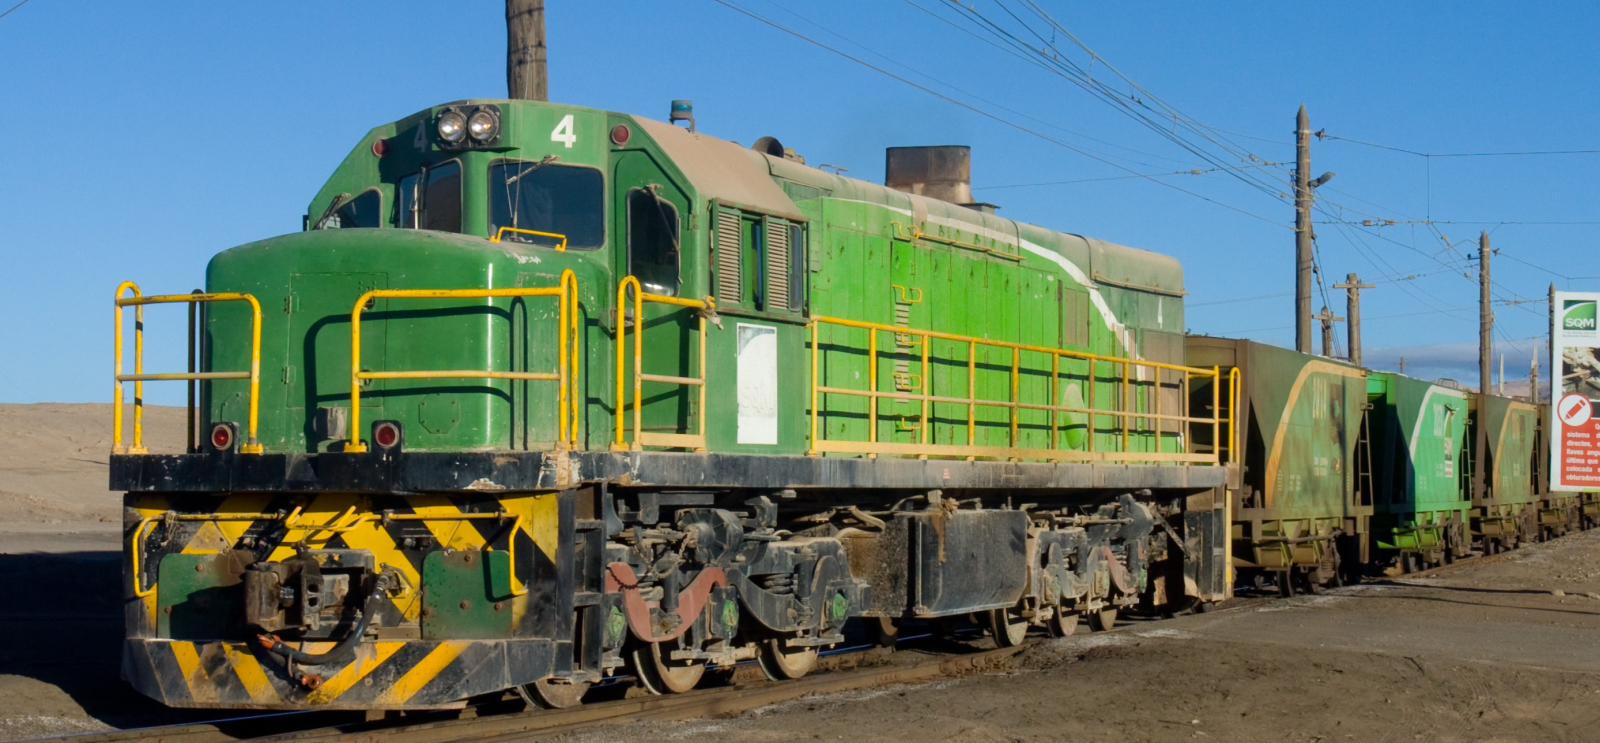 Chilean operator SQM's U20C in April 2012 with a nitrate train at Barriles